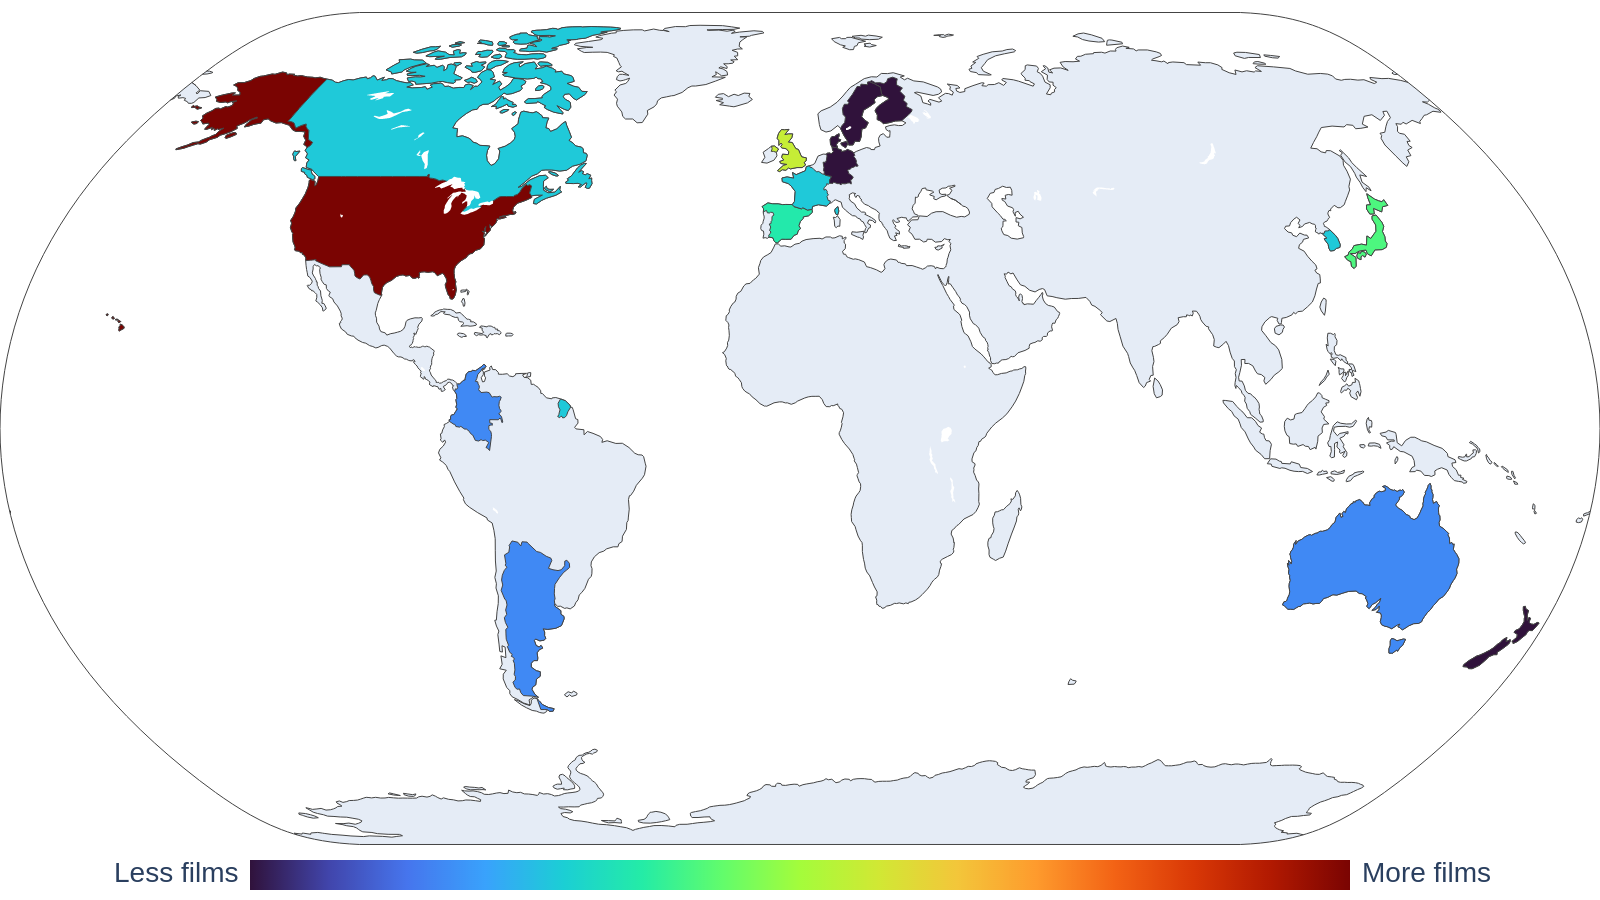 Frequency of films by country choropleth map